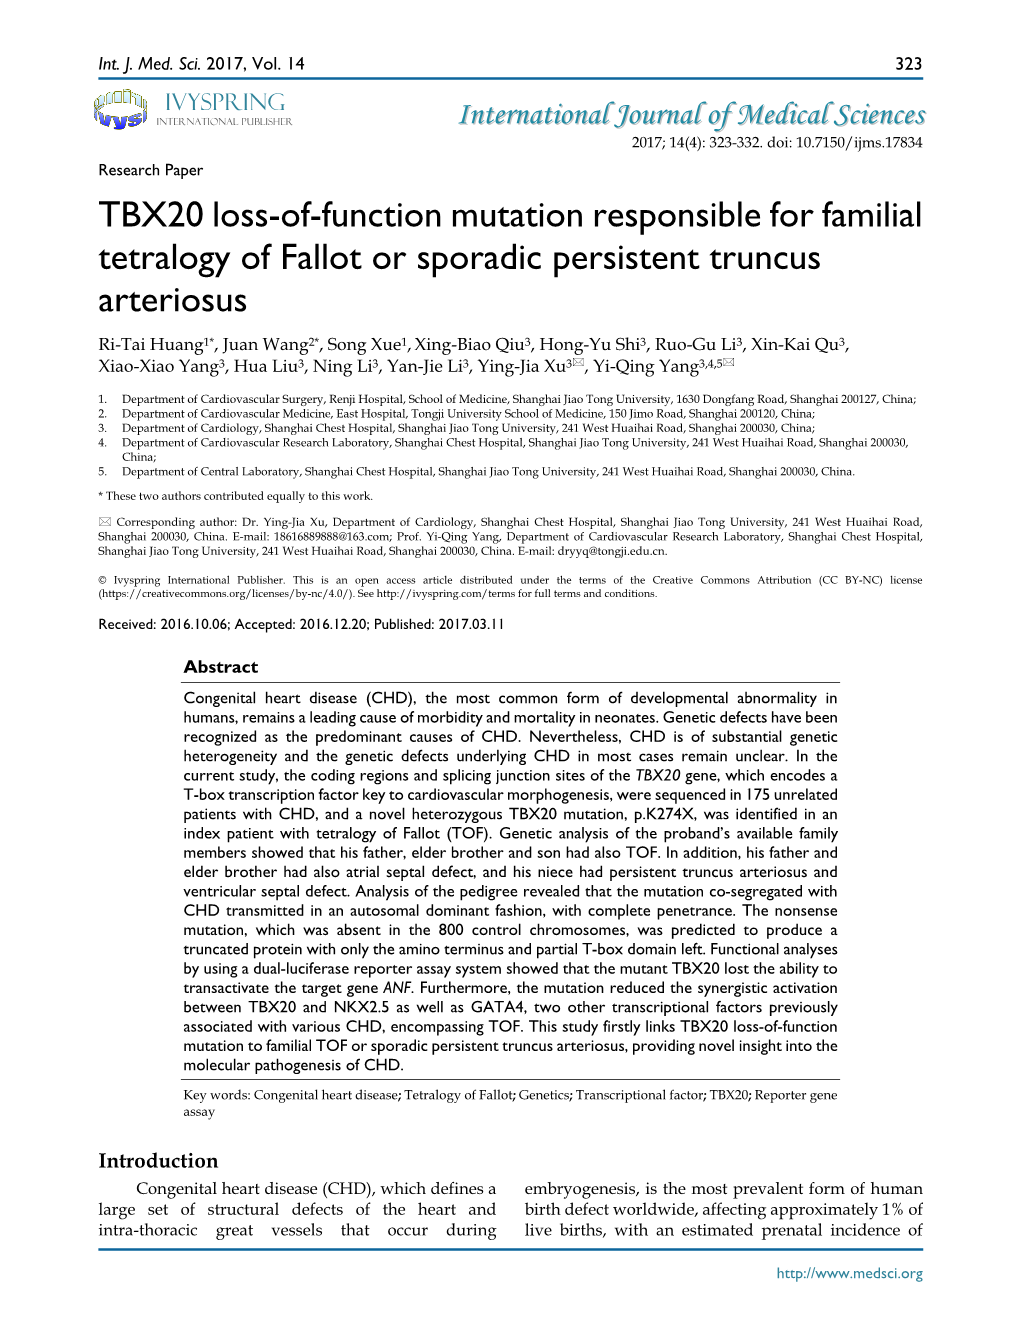 TBX20 Loss-Of-Function Mutation Responsible for Familial Tetralogy Of